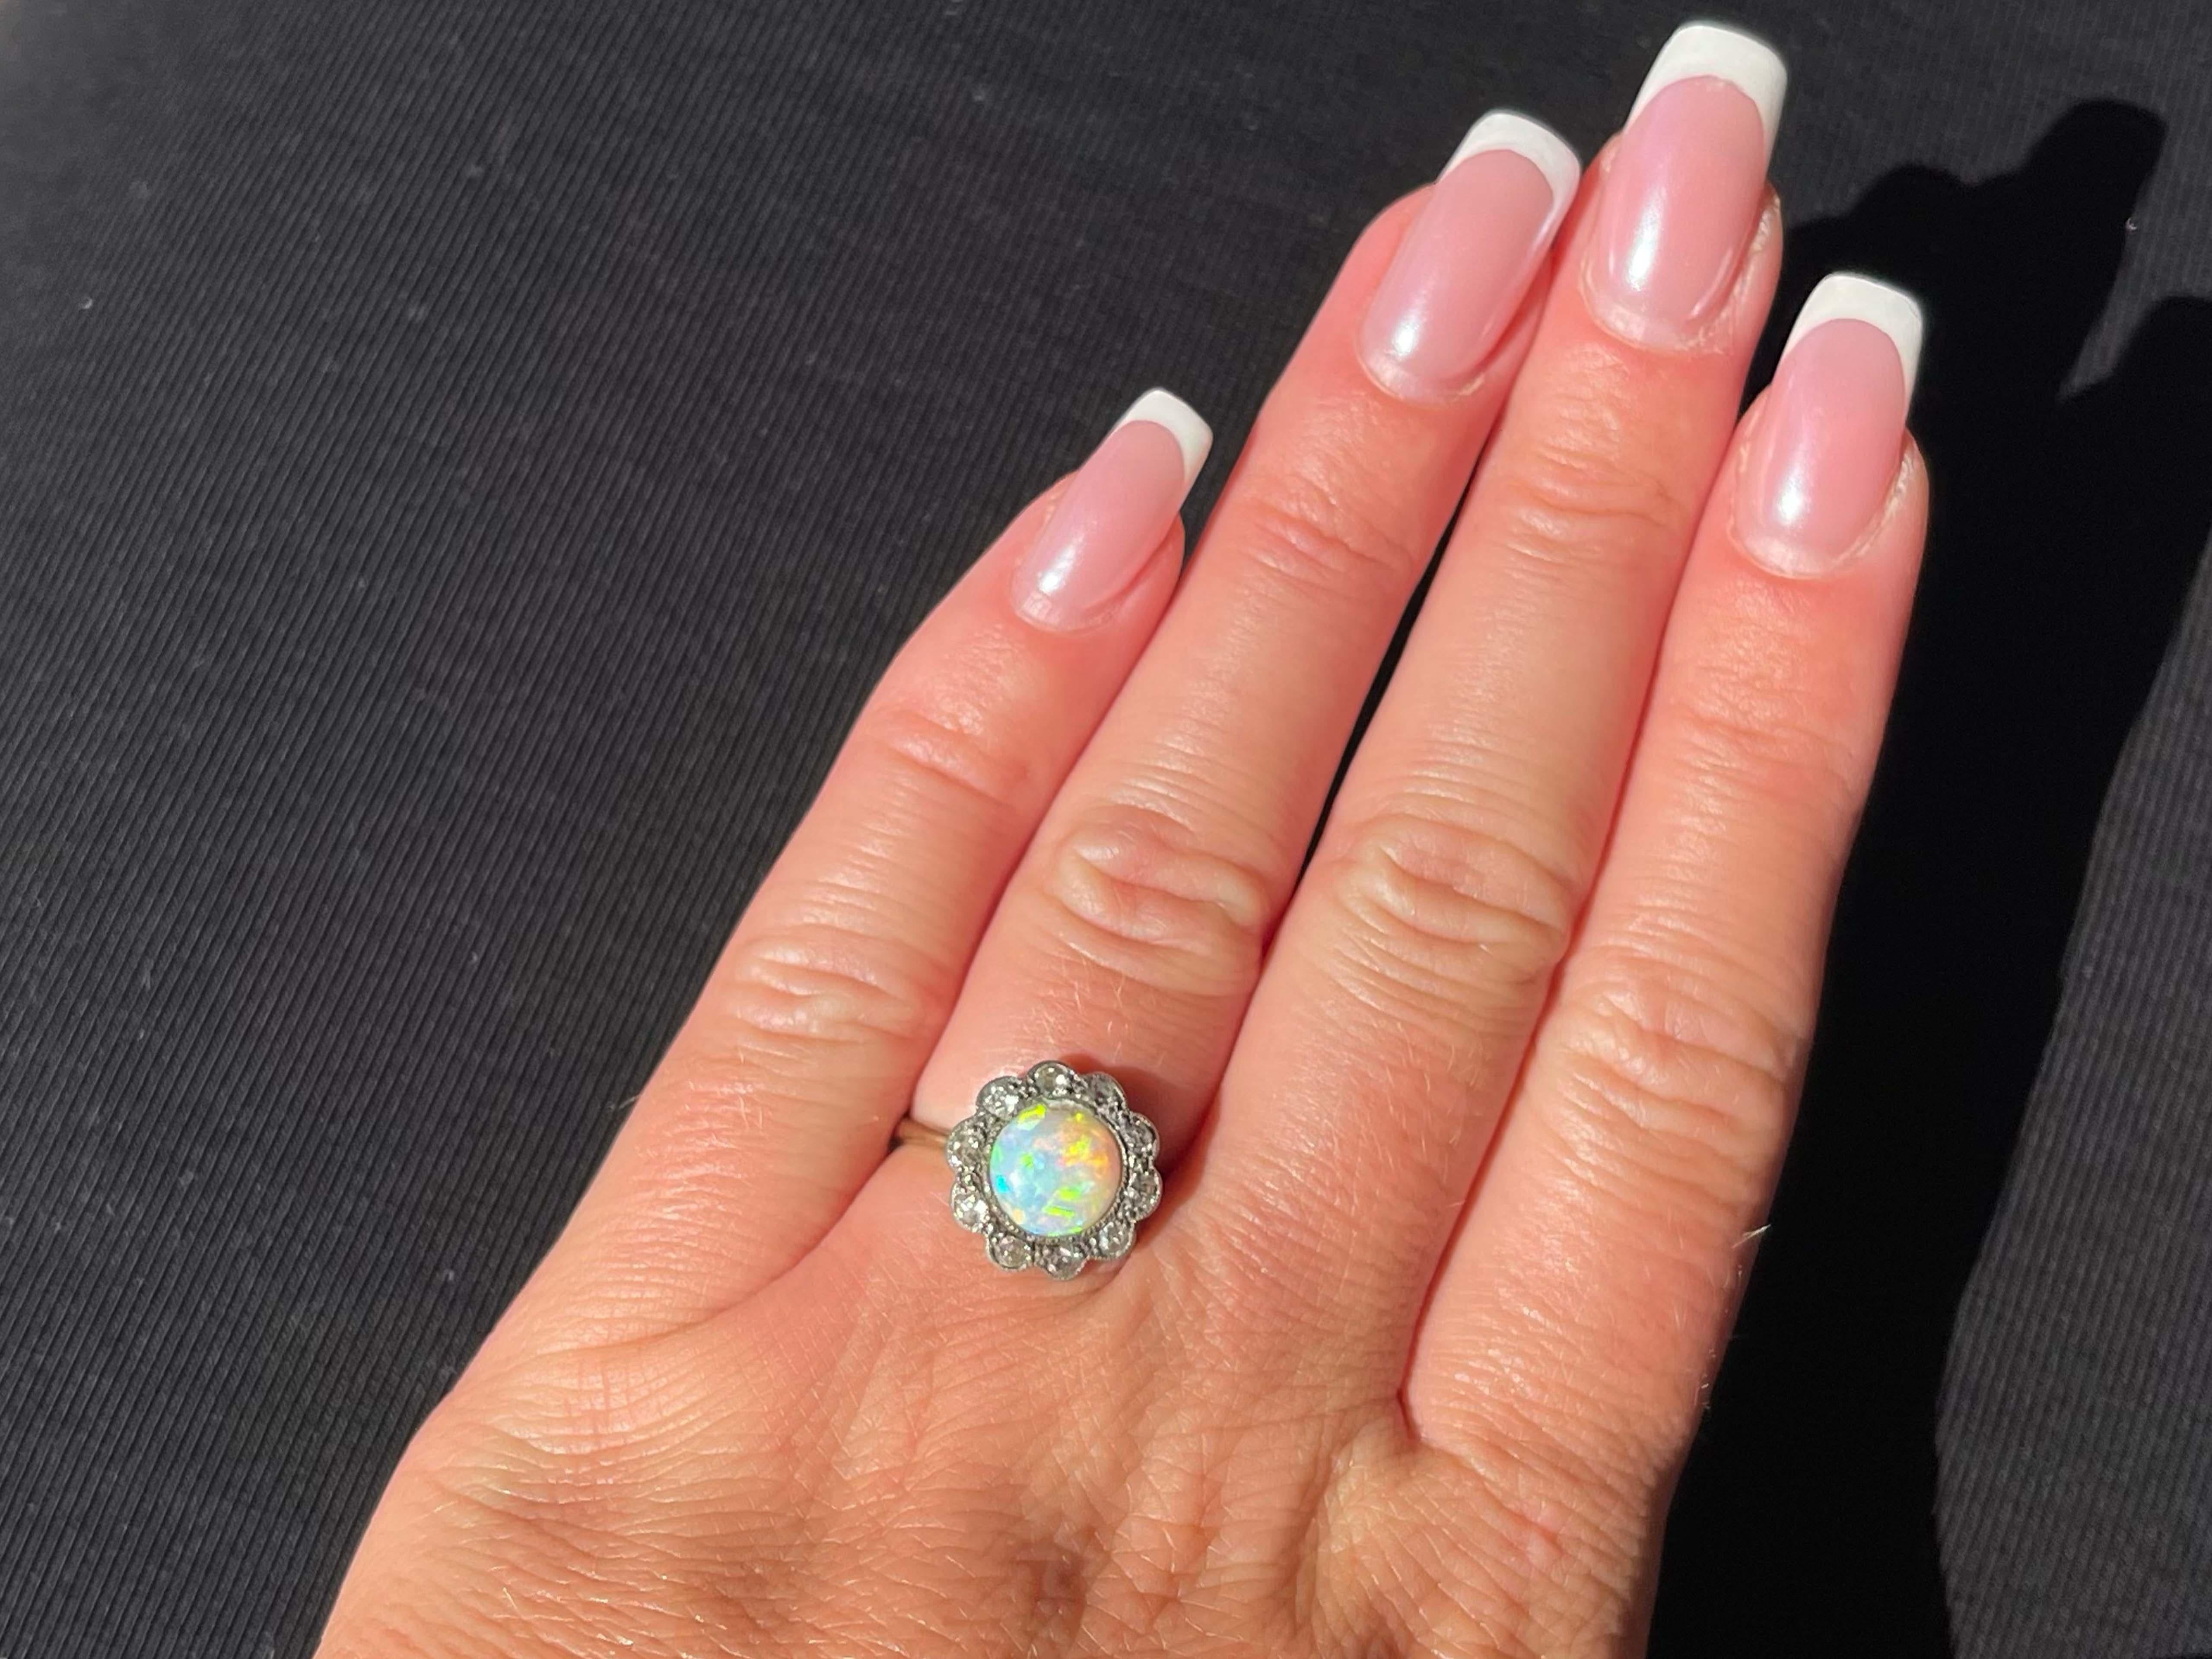 This antique ring was made during the beginning of the 1900's and is estimated to be over 100 years old. It features a stunning opal with beautiful yellow orange and blue hues. Around the opal are 10 old European cut diamonds making a flower halo.